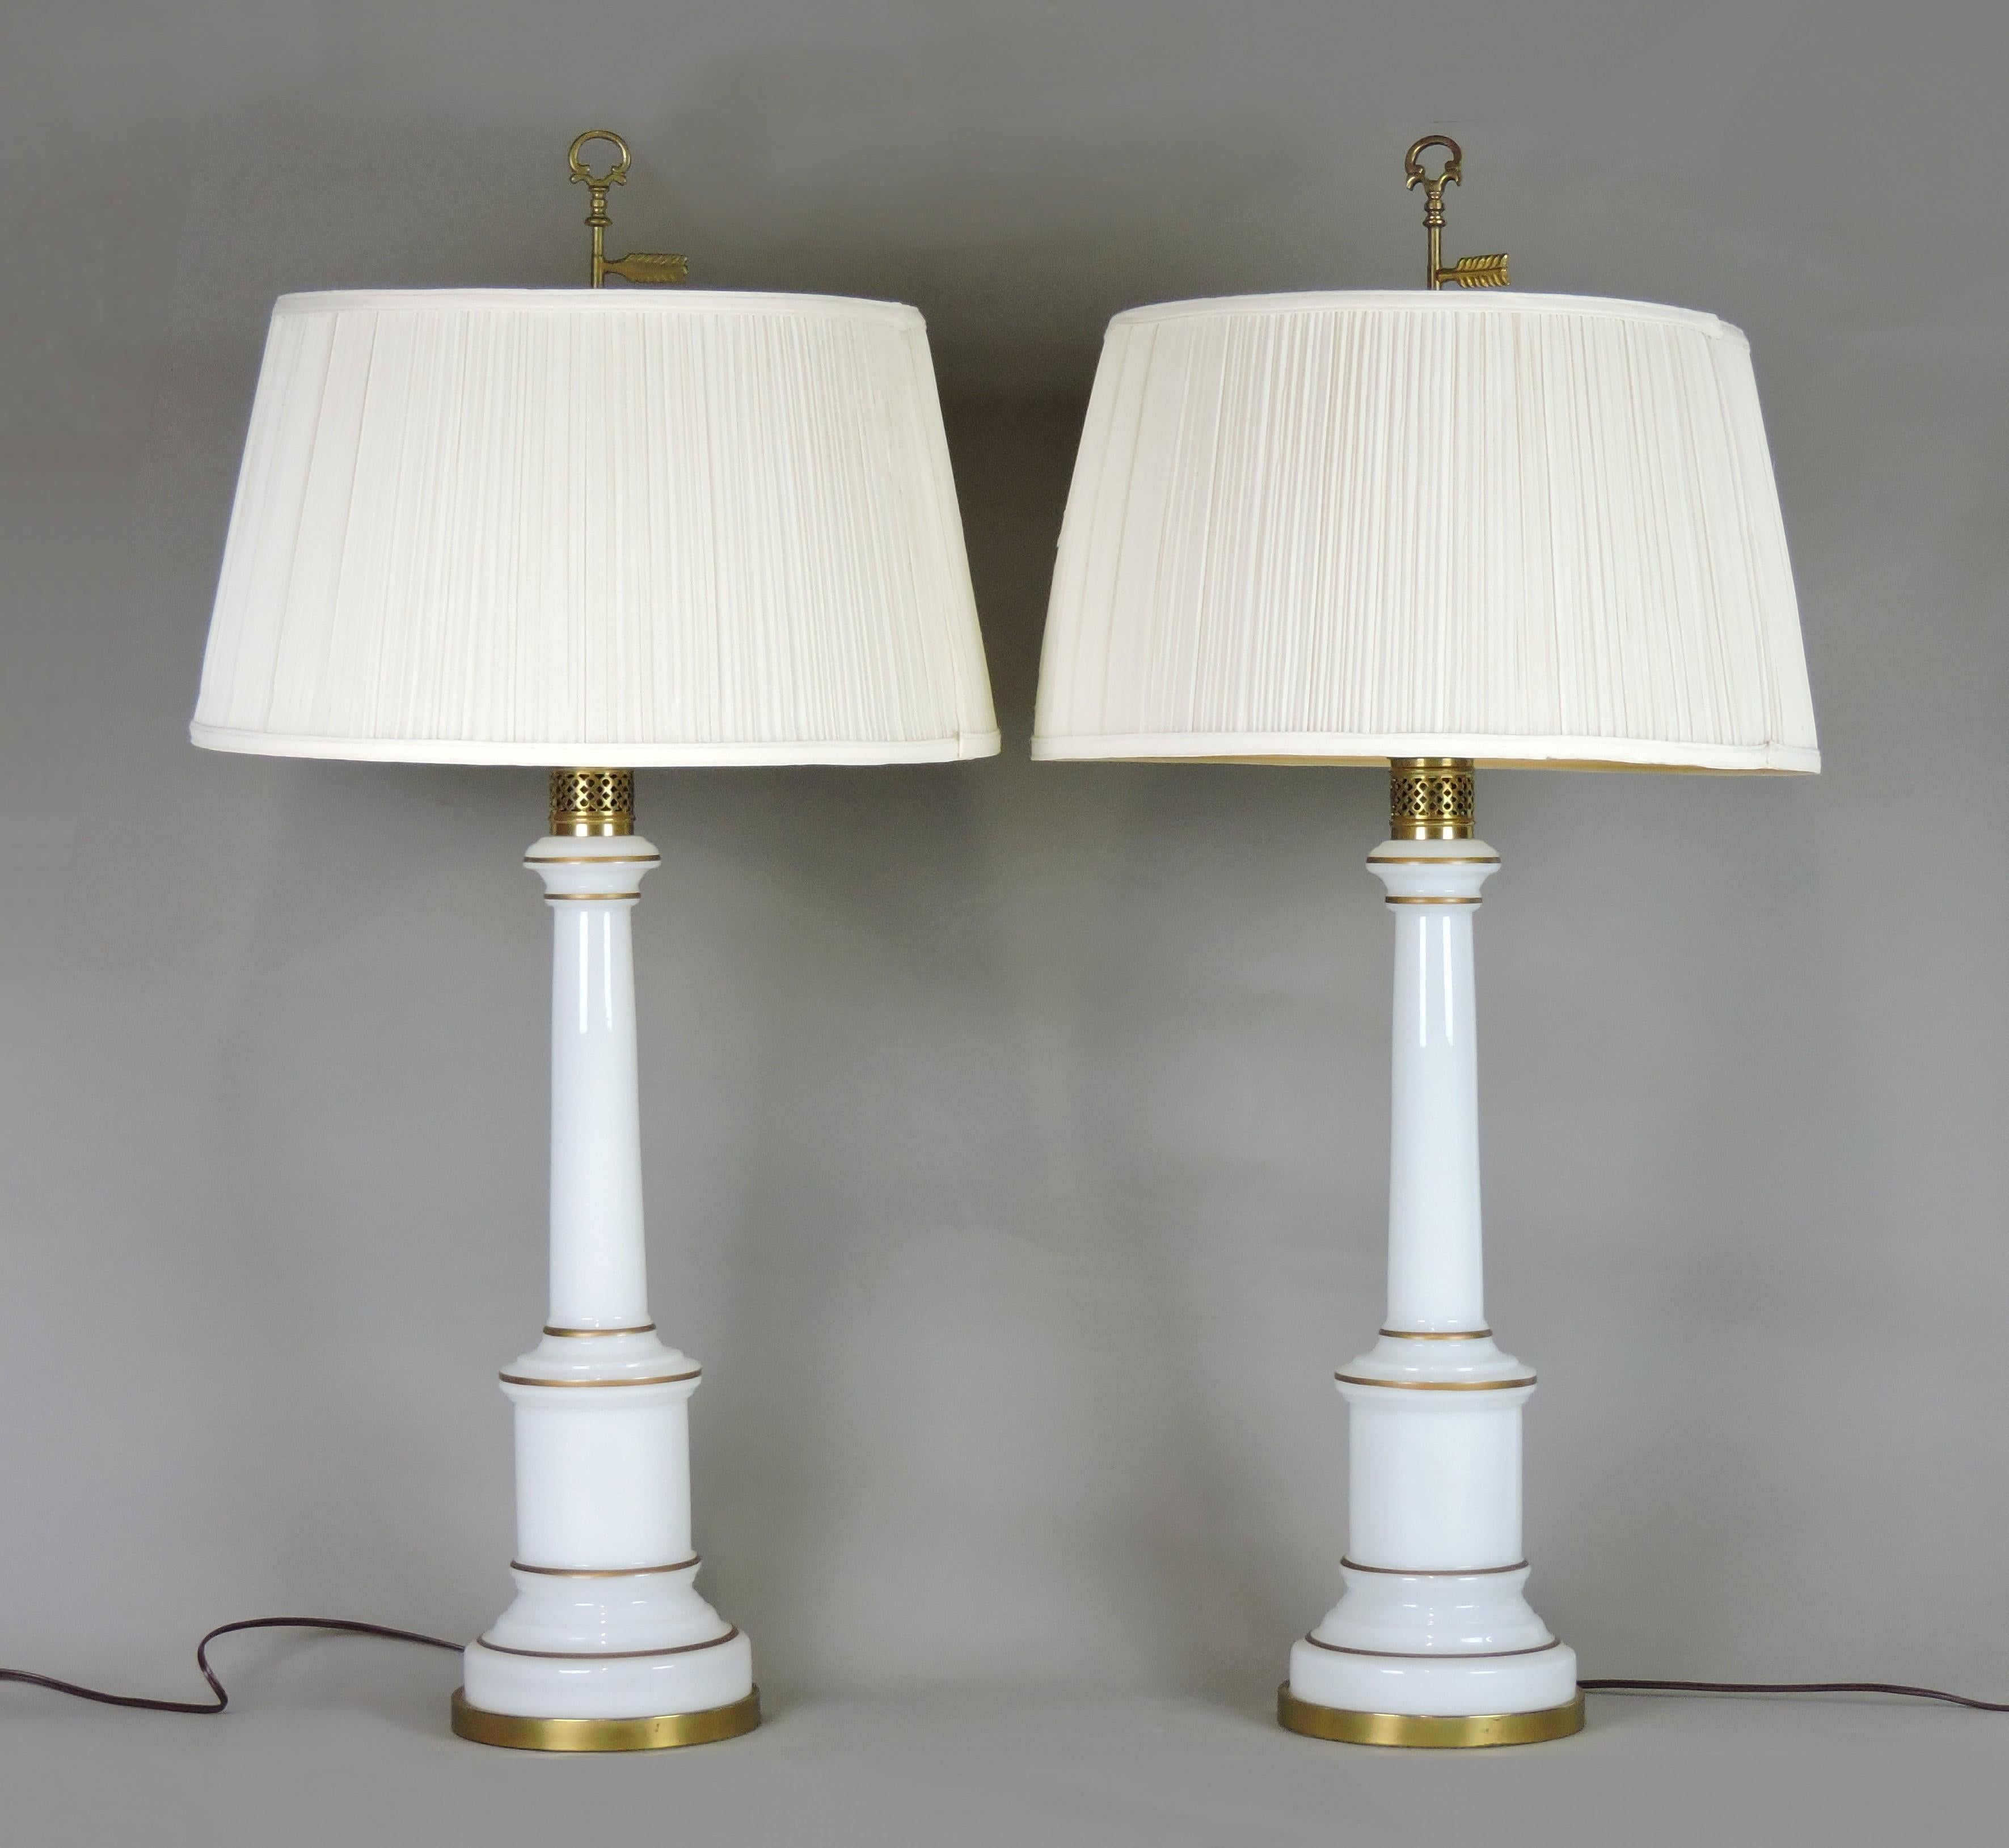 Elegant pair of table lamps by high end lamp manufactuer, Warren Kessler of New York. These lamps are made of white opaline glass with gilt pinstriping and brass accents. These have all new wiring and each take a standard base three-way bulb. The